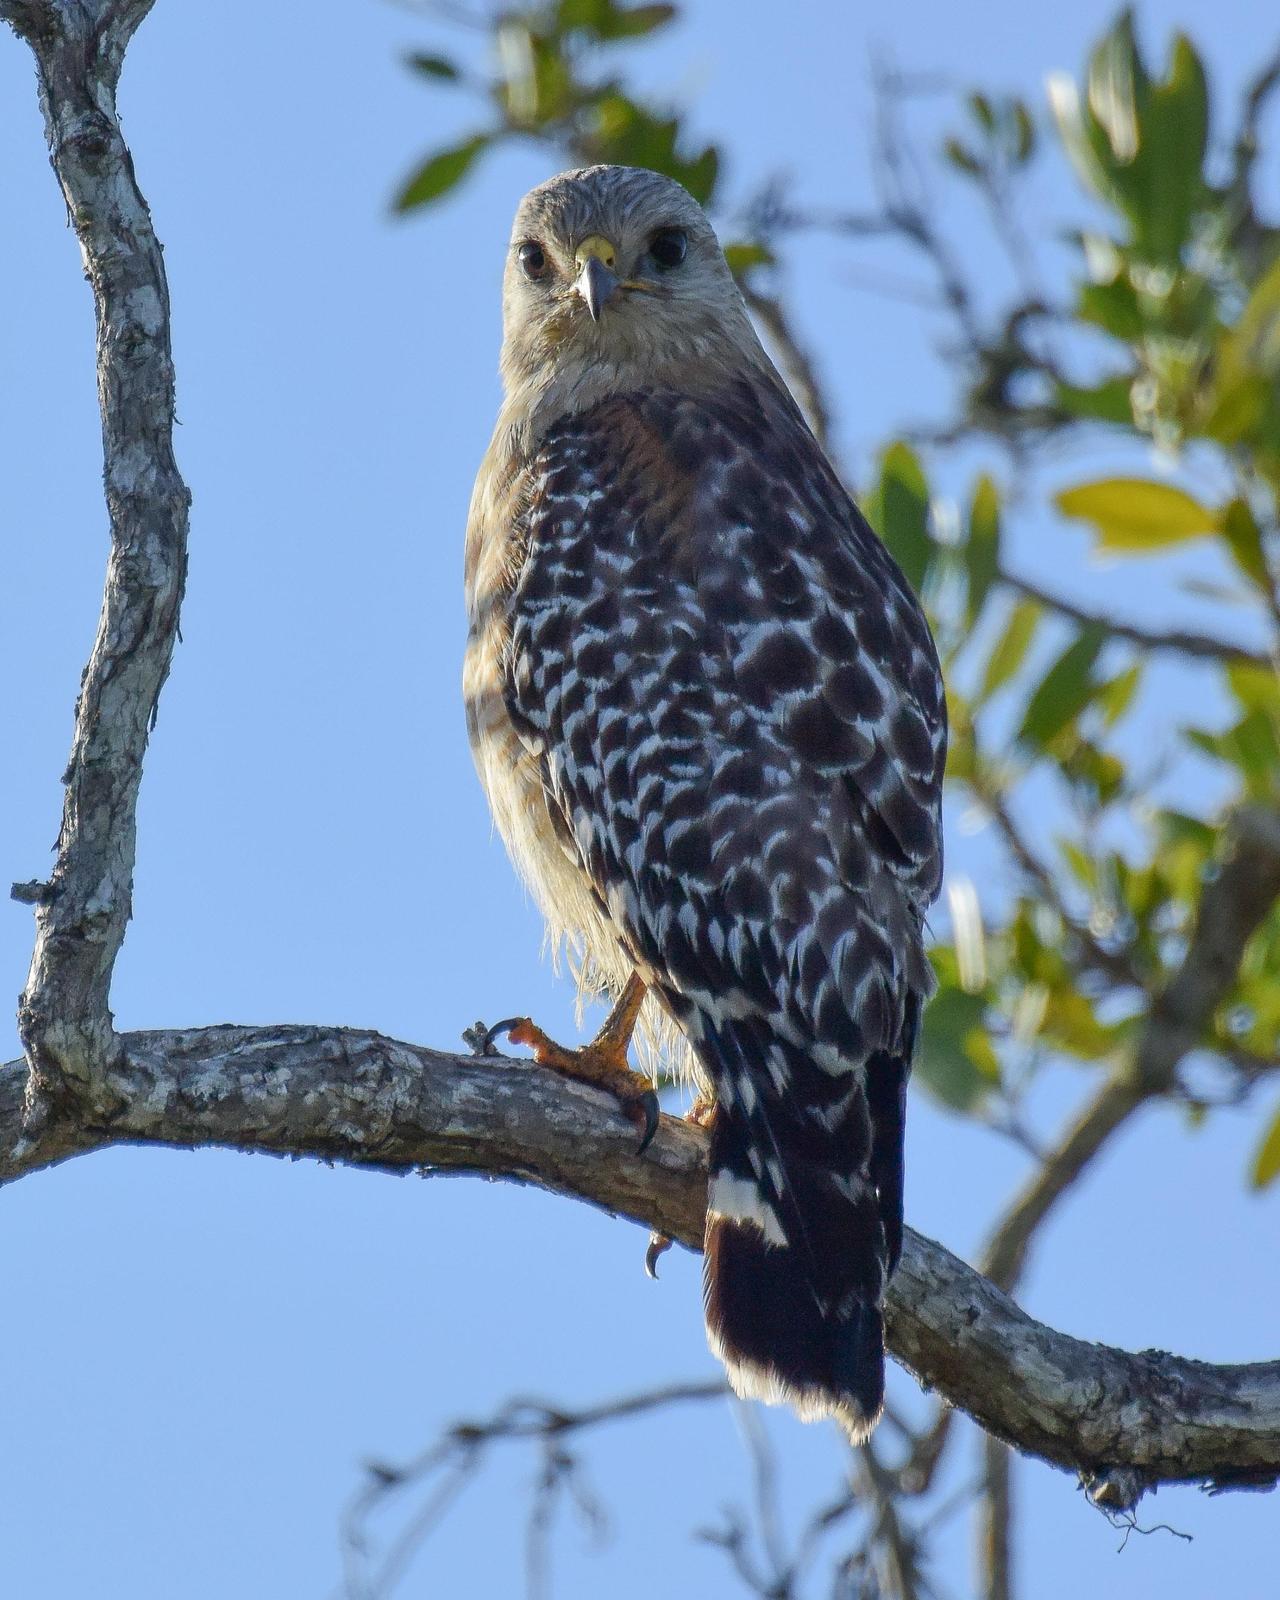 Red-shouldered Hawk Photo by Emily Percival